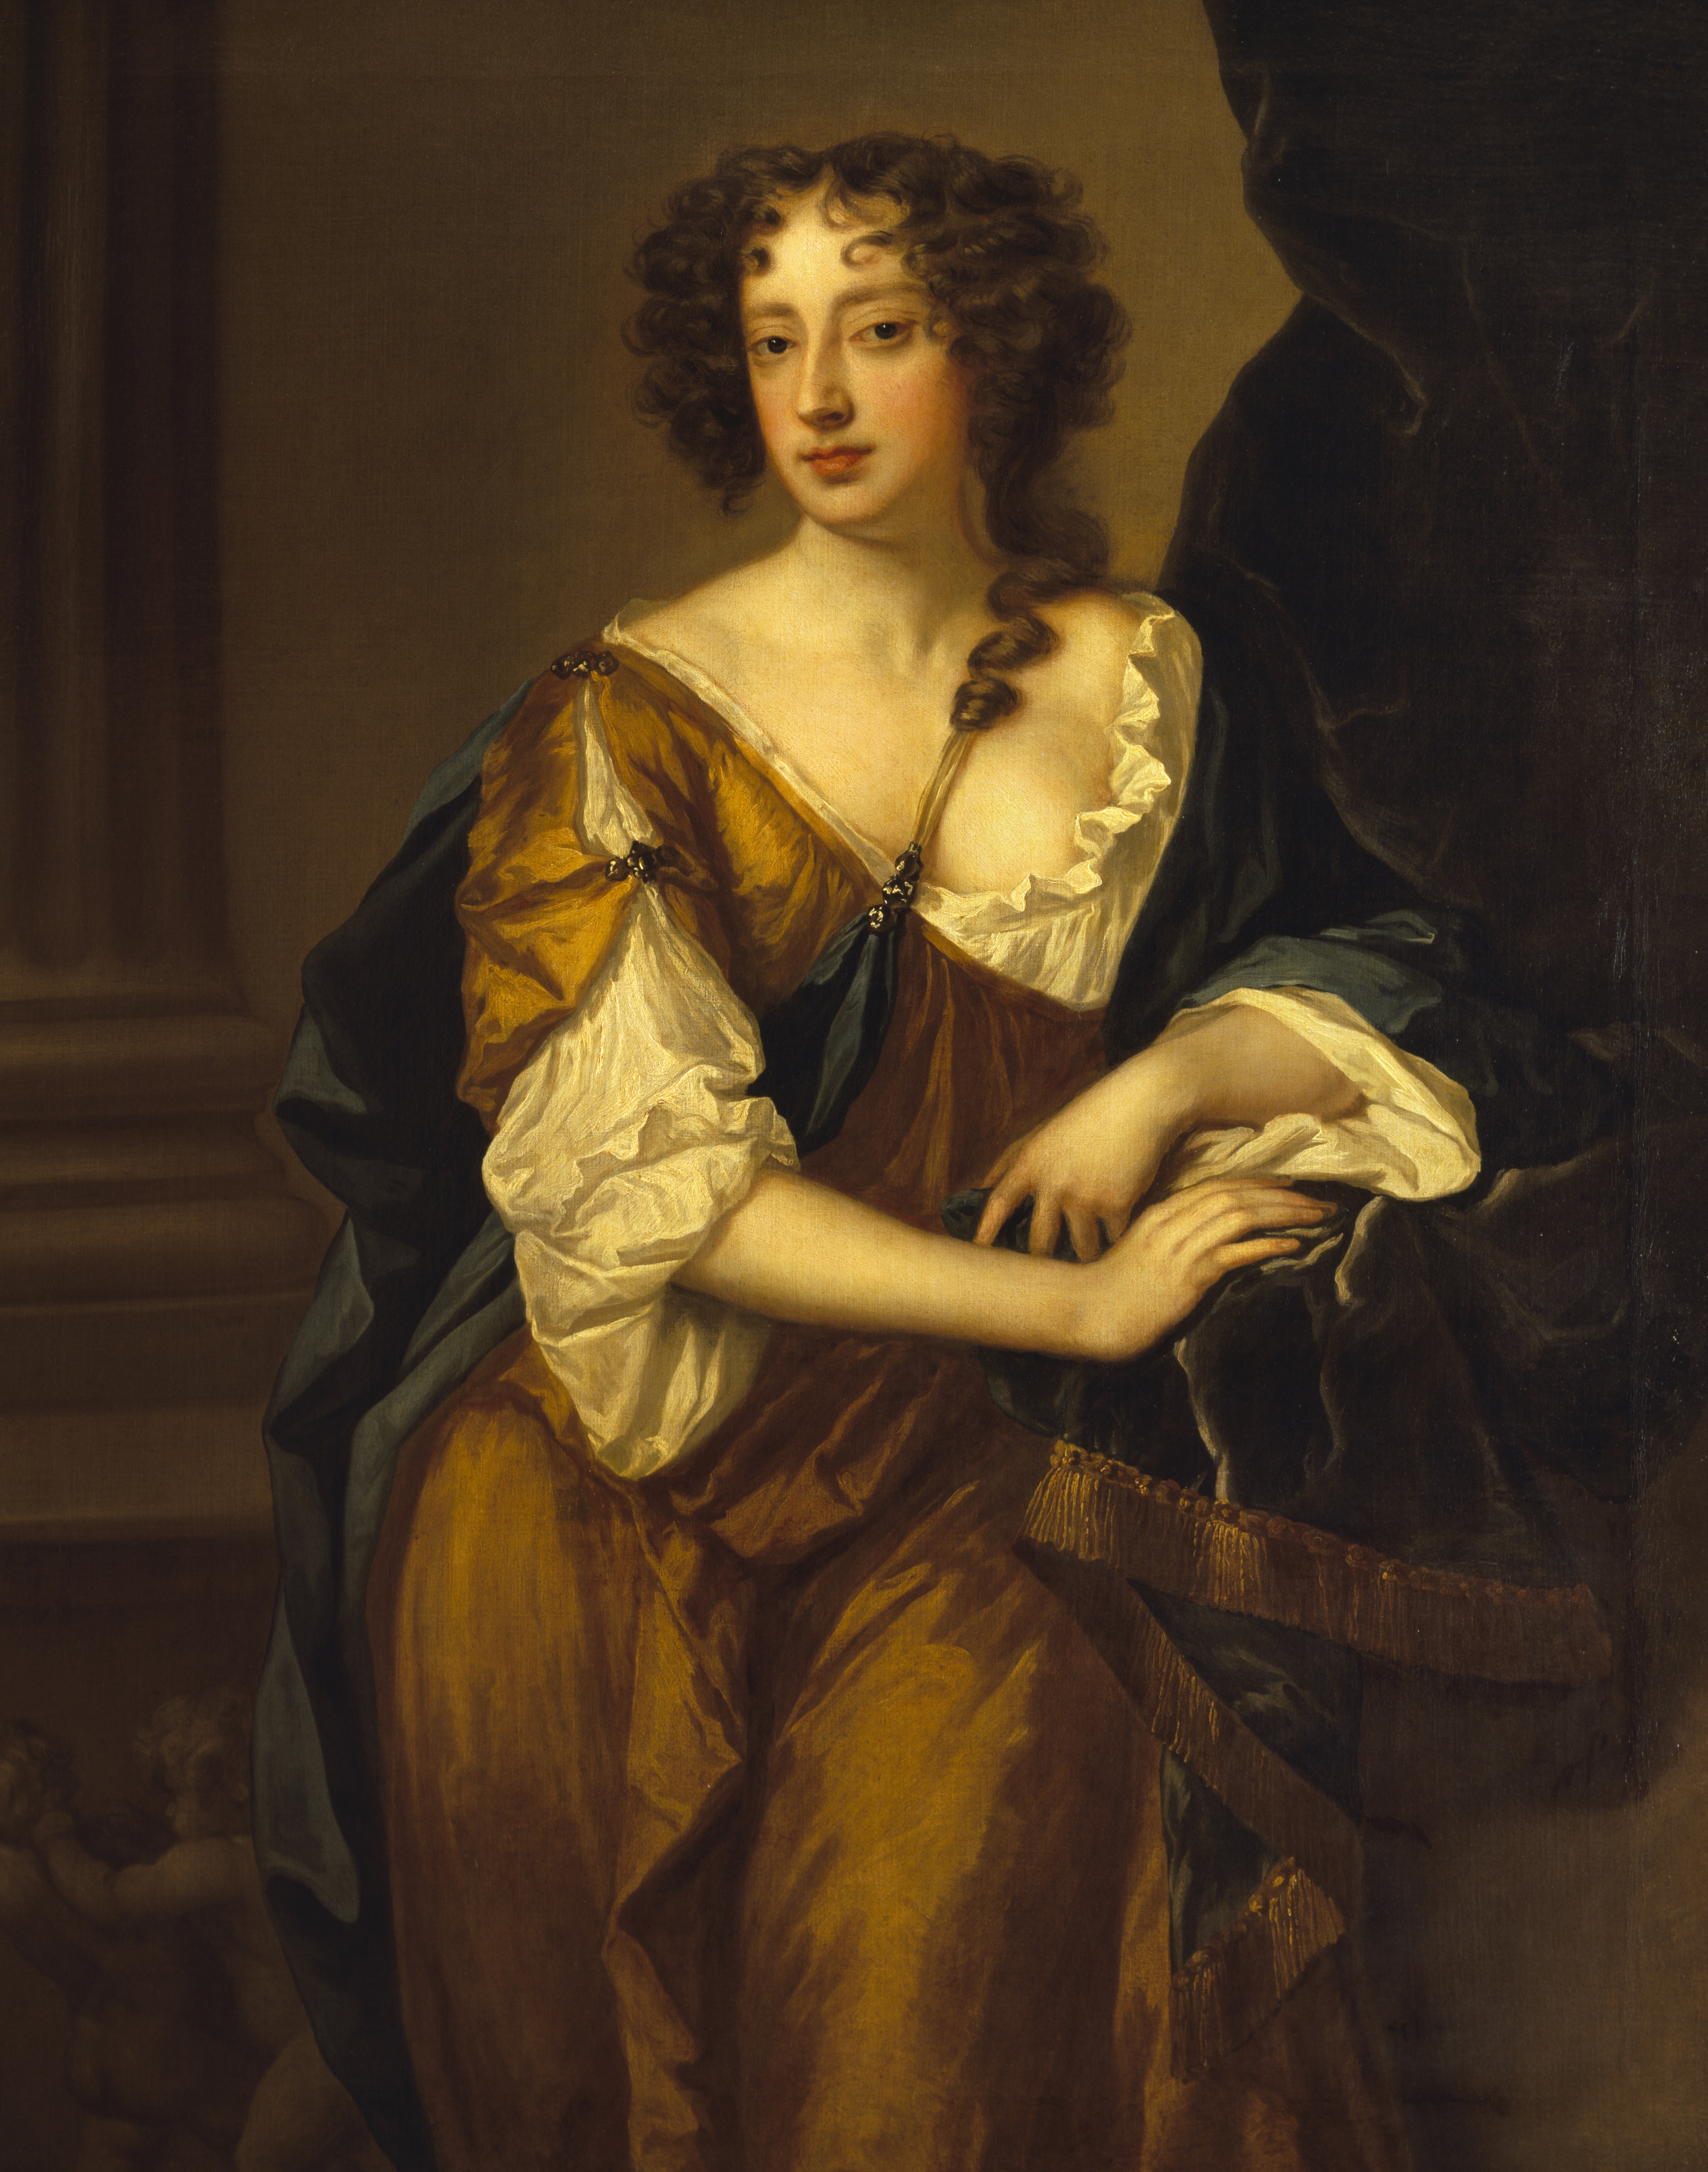 Lady Wriothesley, Duchess of Montagu, studio of Sir Peter Lely ©National Trust Images Derrick E. Witty